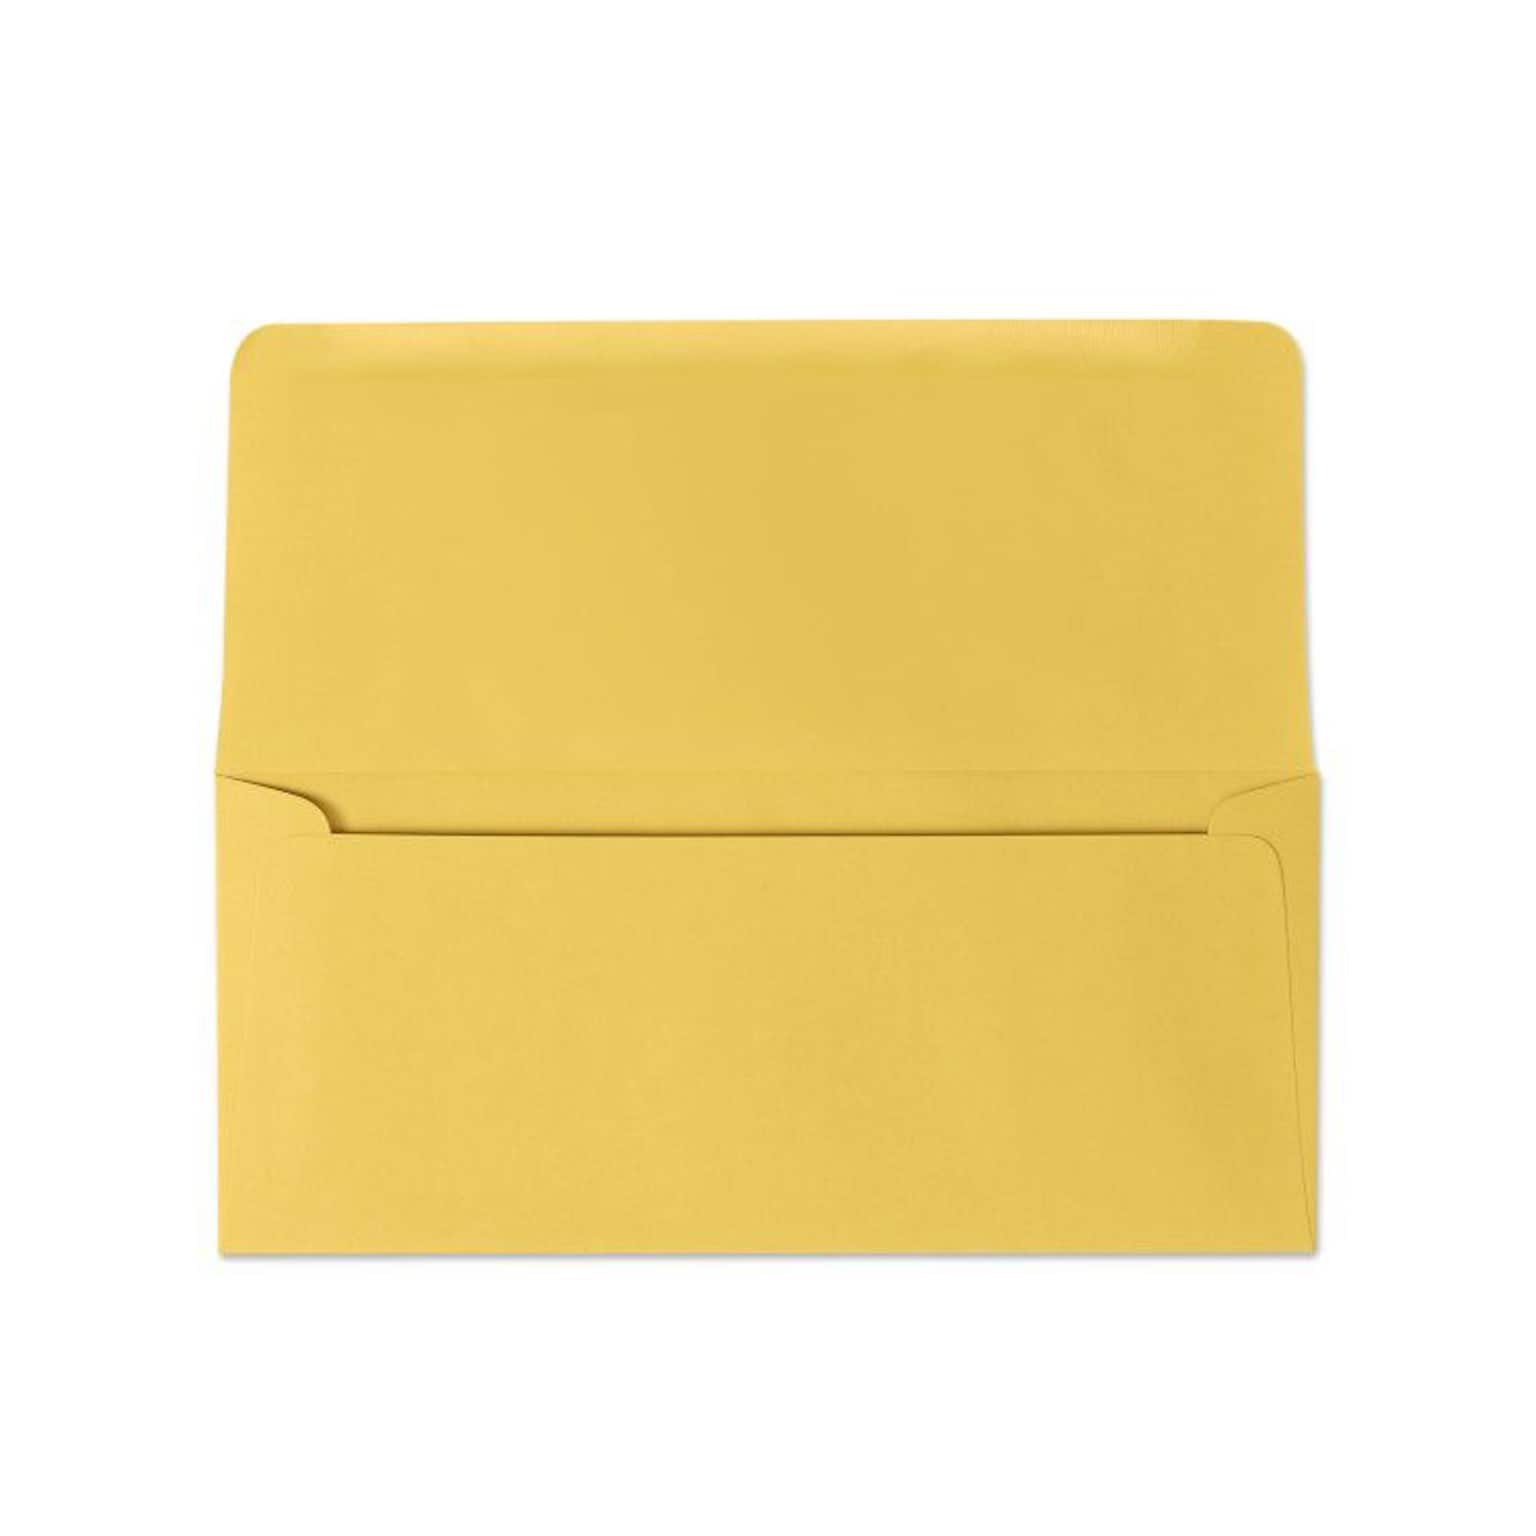 LUX® 3 7/8 x 8 7/8 #9 60lbs. Remittance, Donation Envelopes, goldenrod yellow, 50/Pack, 10 Packs/Box